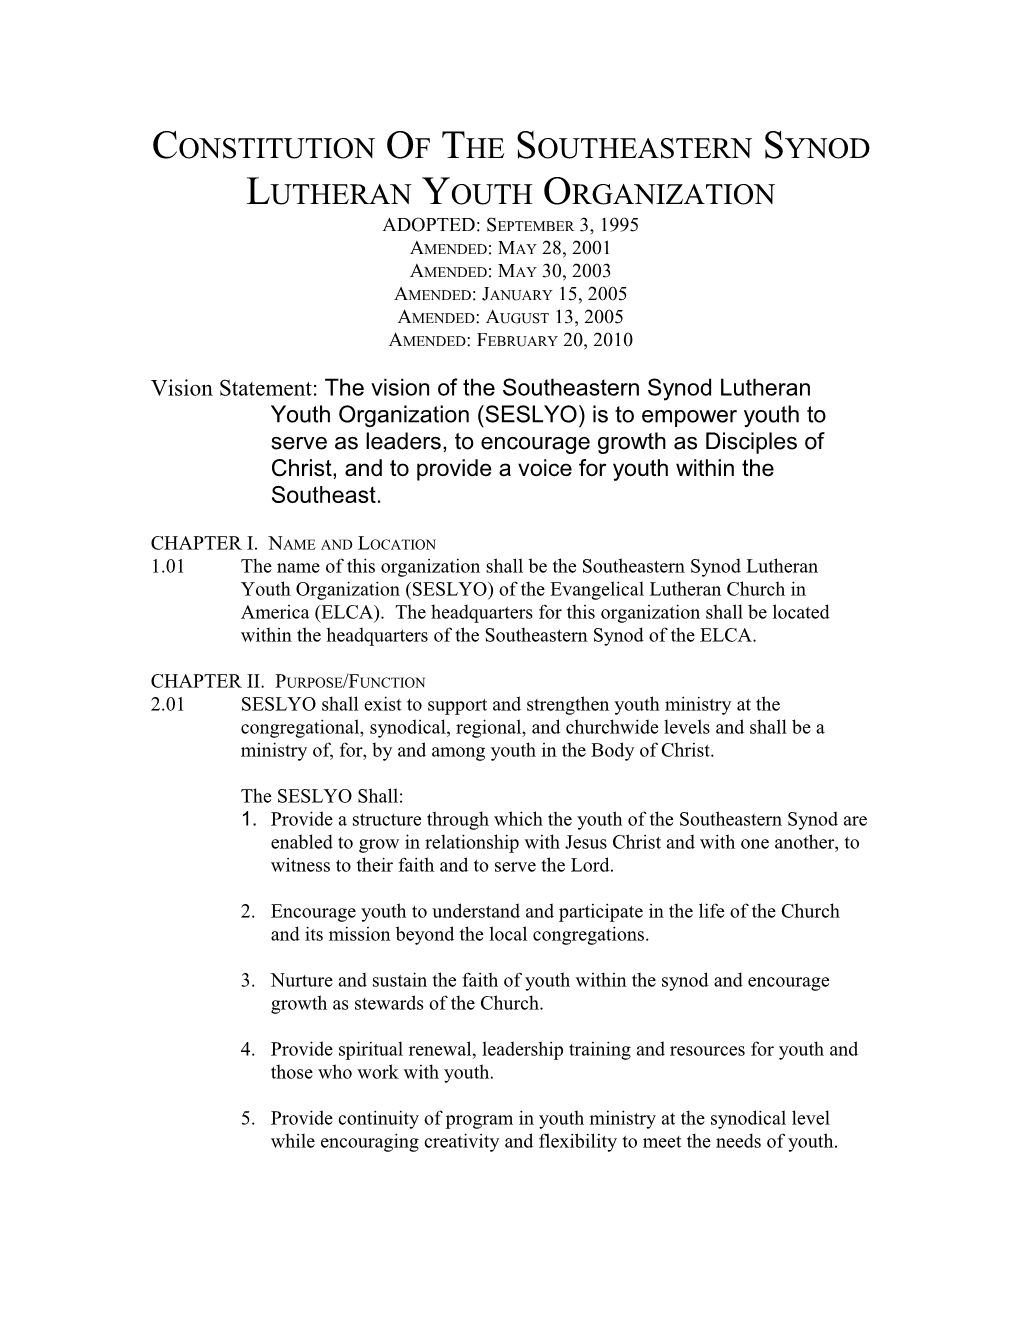 Constitution of the Southeastern Synod Lutheran Youth Organization